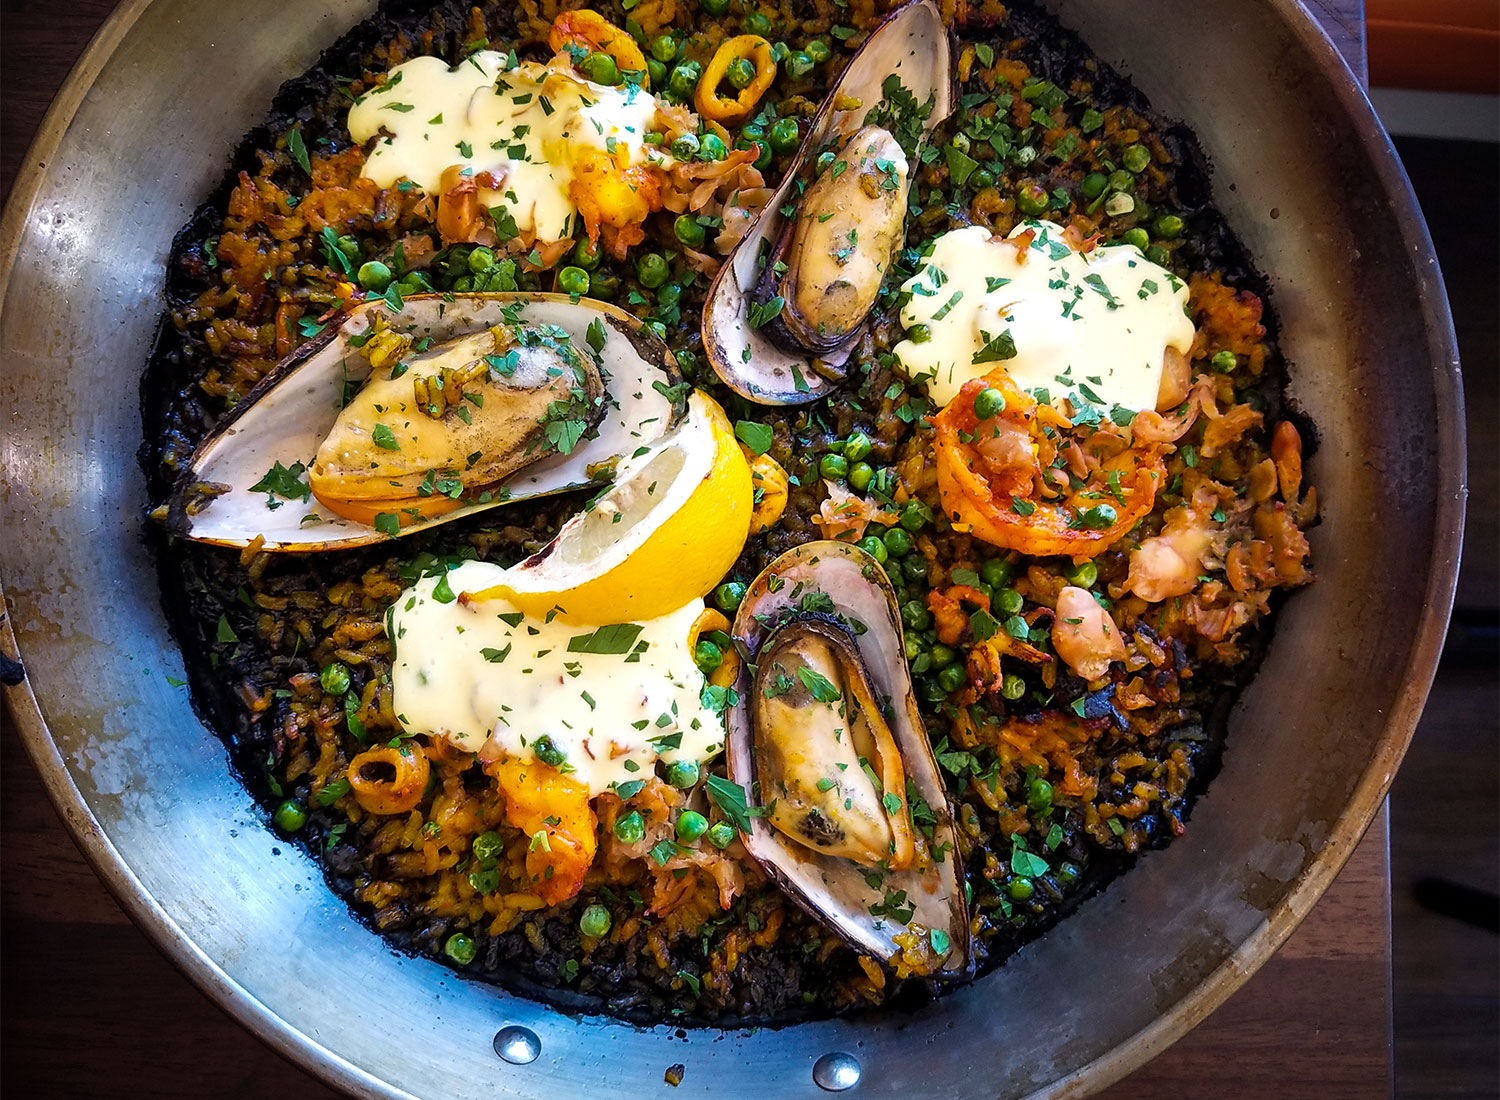 El Pescador paella with sea clams, mussels, prawns, squid, sweet peas, arroz negro, peppers and aioli at Gerards Paella Y Tapas in Santa Rosa. Heather Irwin/PD